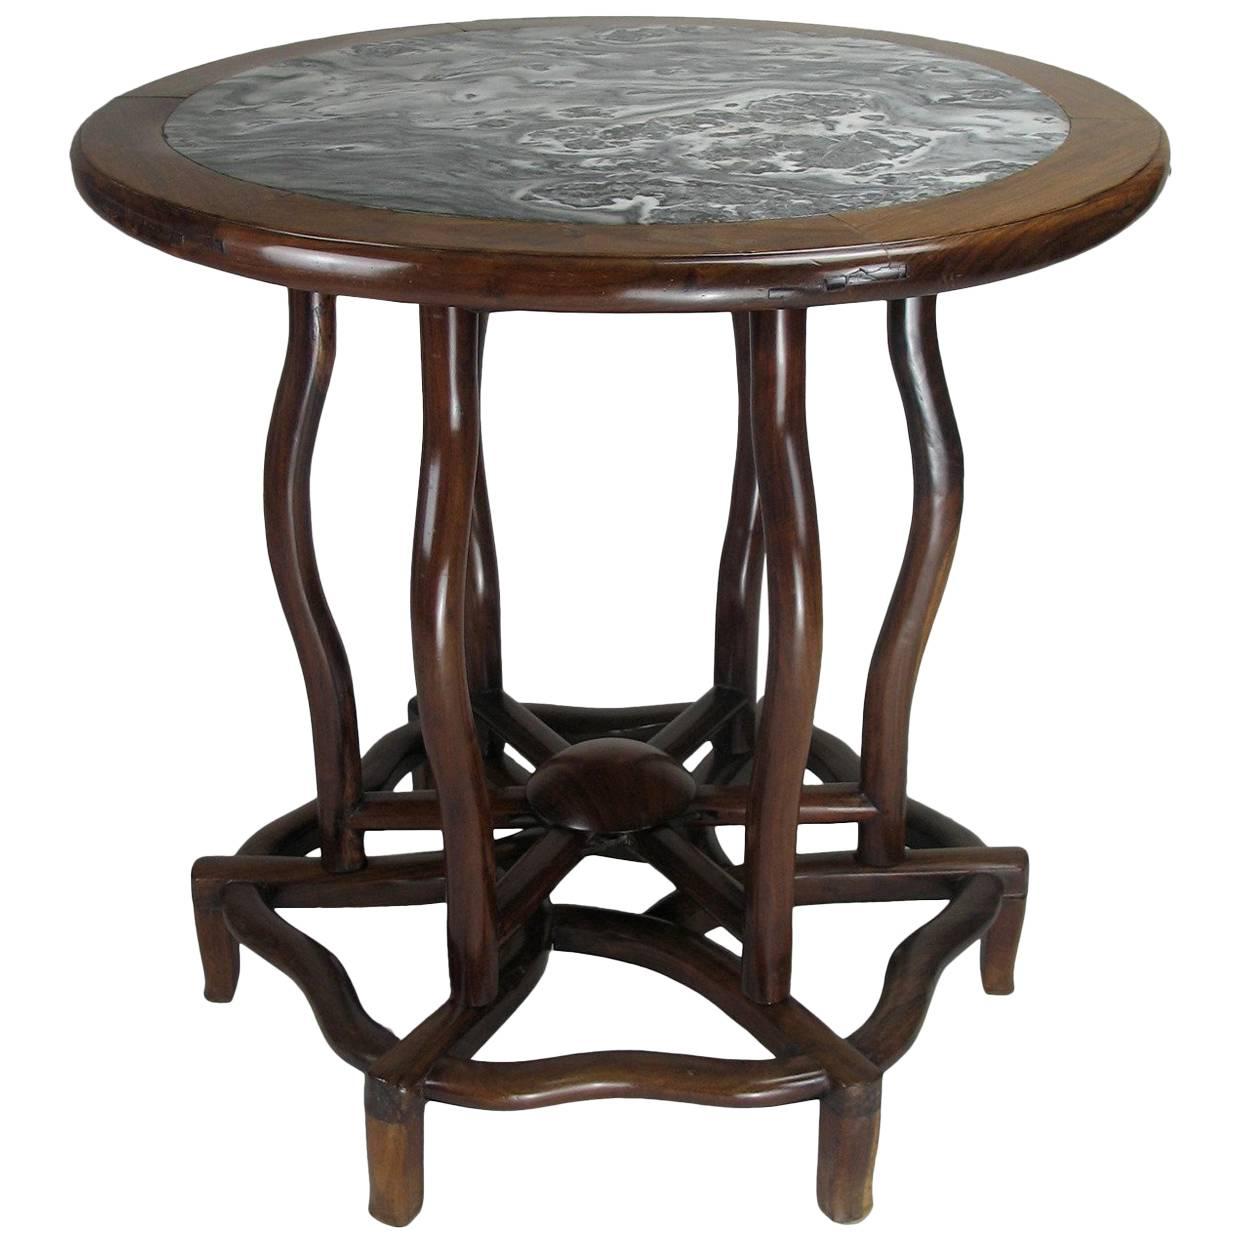 Chinese Hardwood Circular Table with a Marble Top For Sale